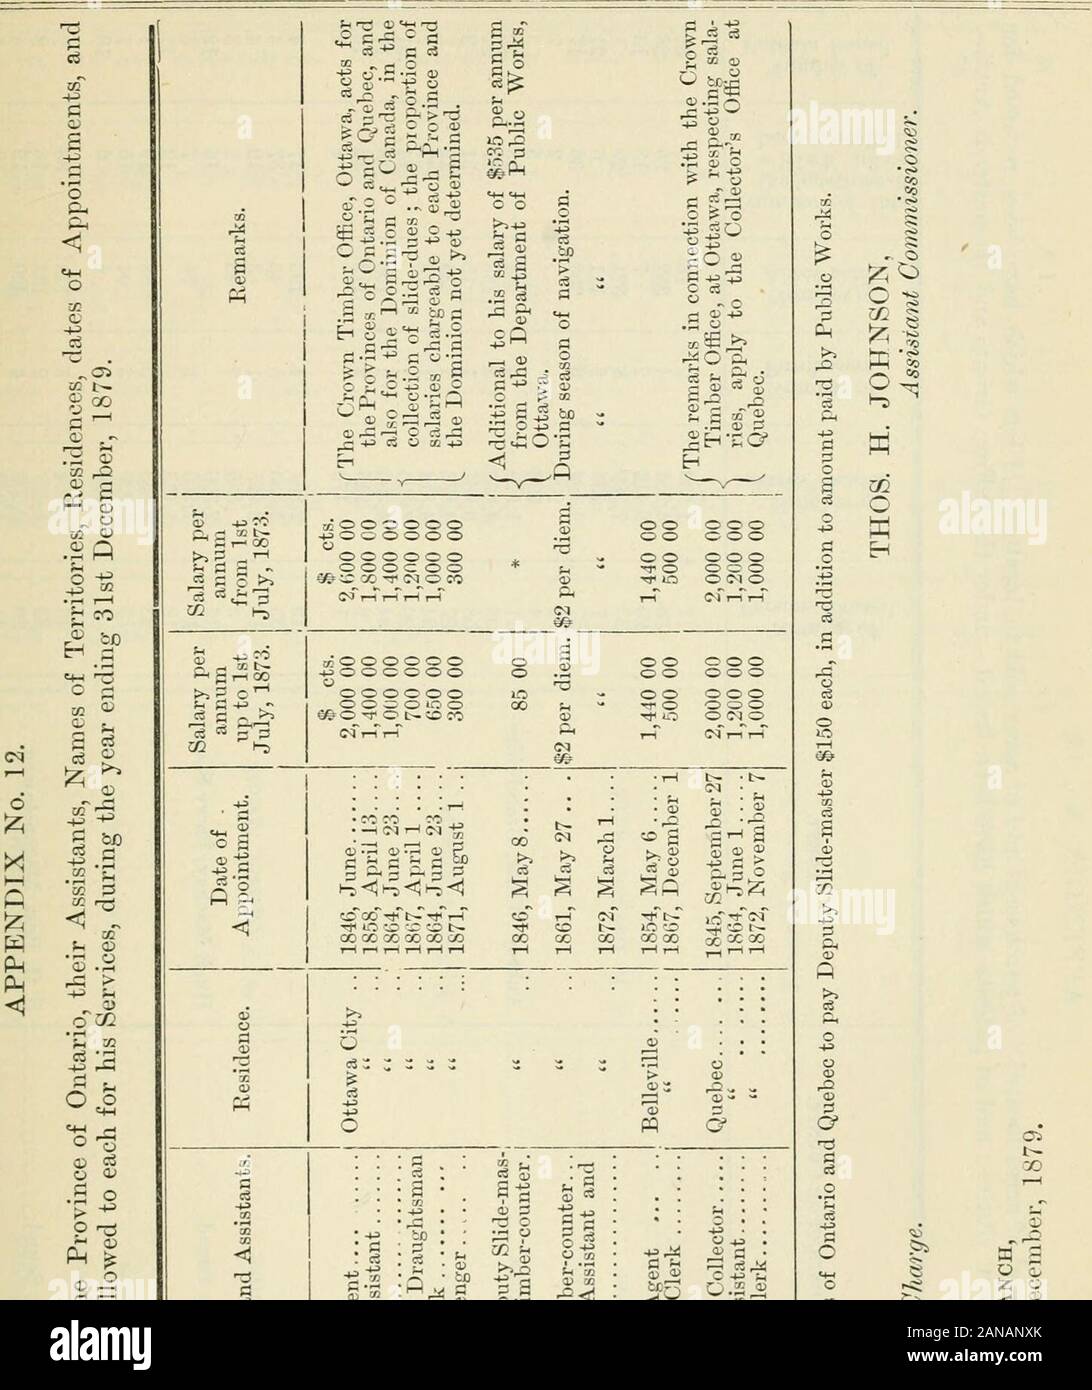 Ontario Sessional Papers, 1880, No.4-8 . Feet. Pieces. Trespass, Timber j Ground&c. Dues. 1 Rent. 1 Bonus. Total 113 29 7821,616 75,36515,312 1,358 $ cts.2,471 52 2,211 28 6,144 54 $ cts.137,998 84 67,313 28 $ cts.14,761 00 .^834 m S cts.1,971 24 13 82 12,696 57 $ cts.157,202 60 73,372 88 112,319 21 146 35 79,018 10 14 460 no 259 35 2,427 91,277 1,358 10,827 34 284,330 22 33,055 50 14,681 63 342,894 69 THOS. H. JOHNSON, Assistant Commissioner. 13t 43 Yictoria. Sessional Papers (No. 4.) A. 1880 APPENDIX No. 11. Woods and Forests. Statement of Revenue collected during the year ending 31st Decemb Stock Photo